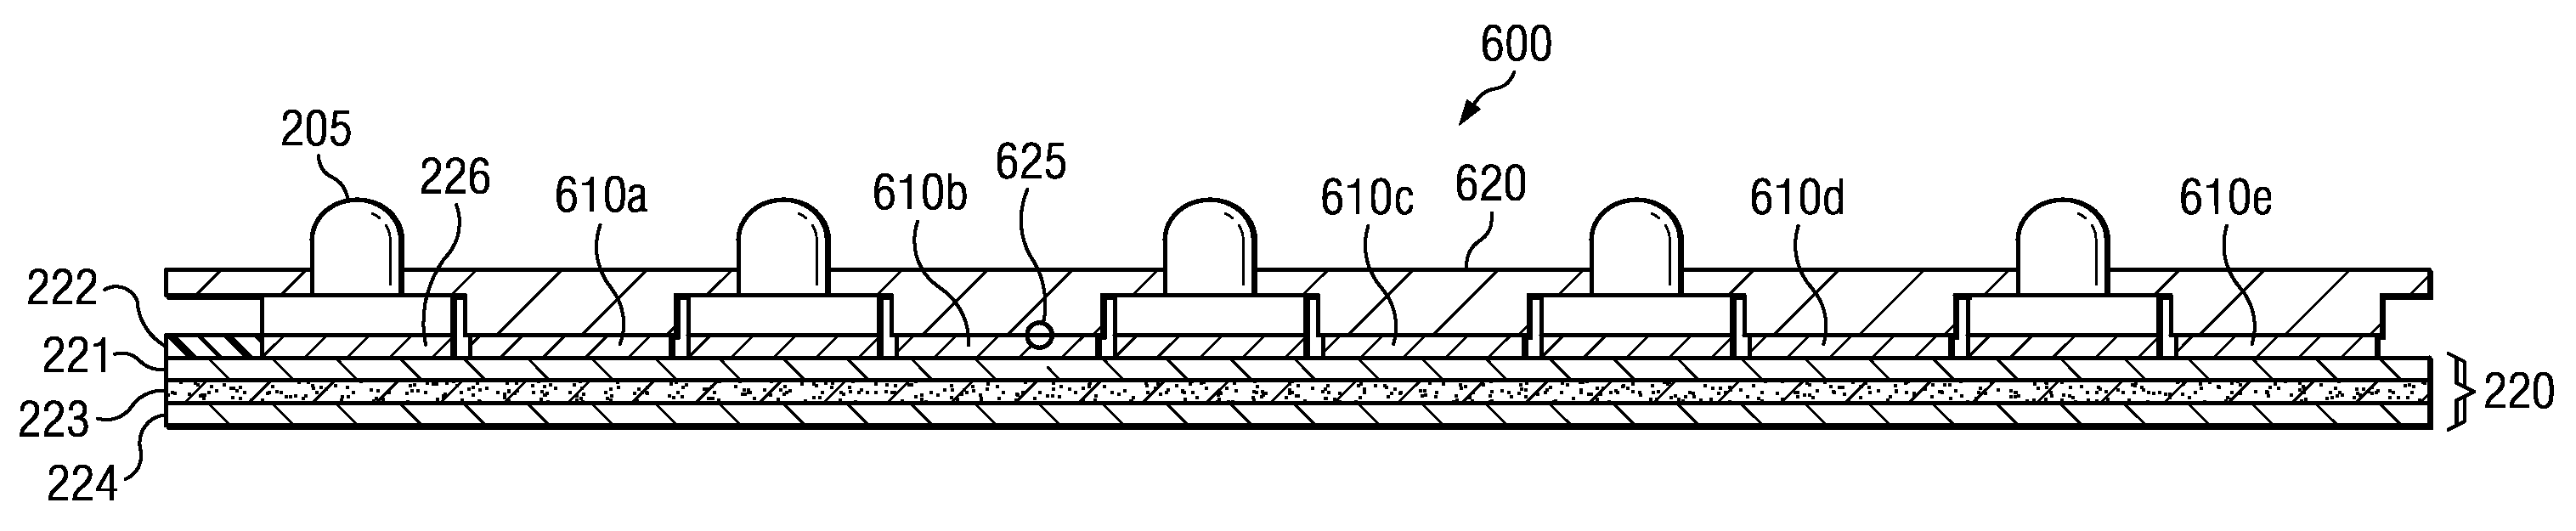 Systems and methods providing thermal spreading for an LED module